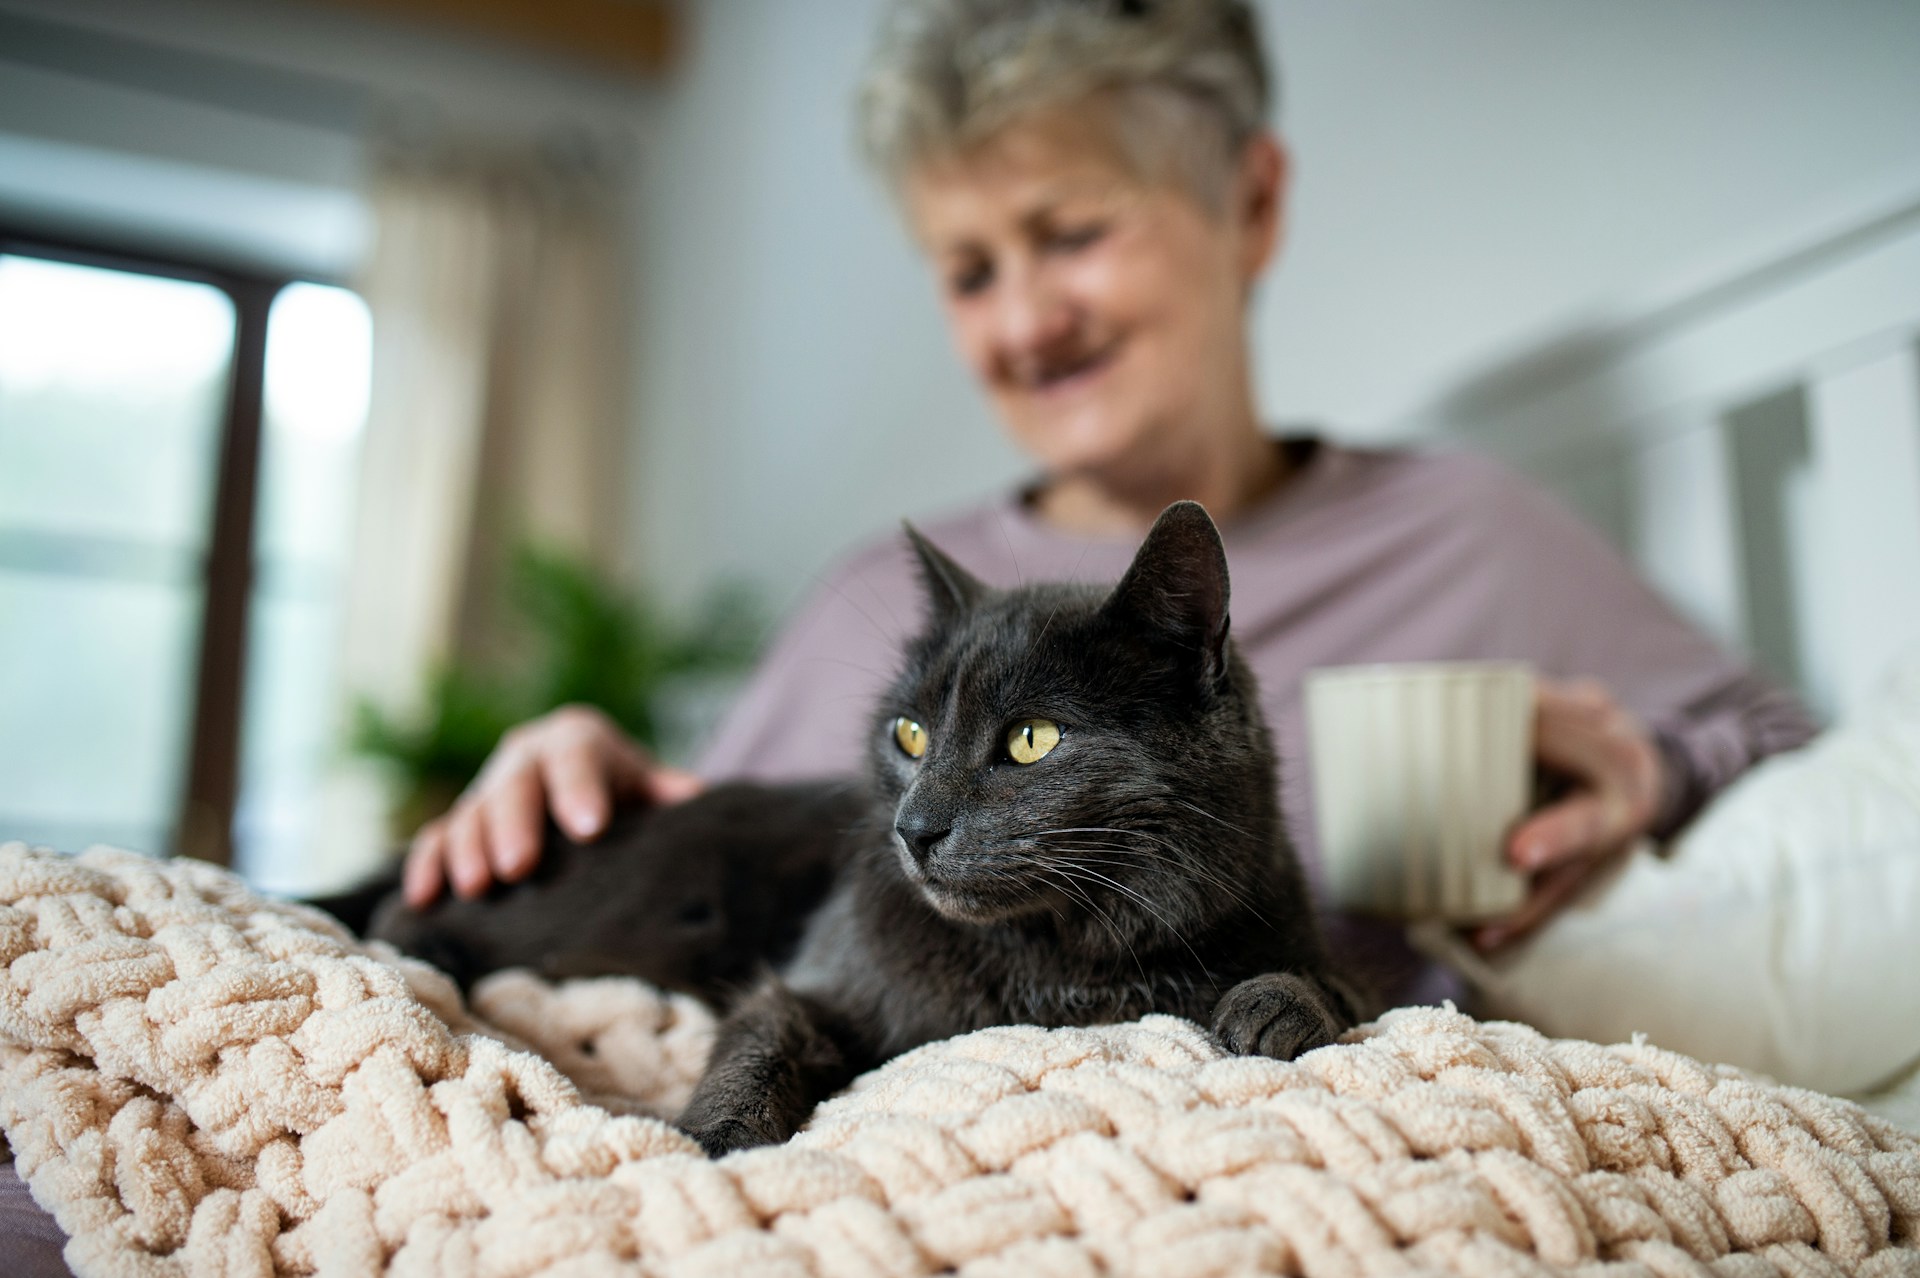 A black cat sitting with an elderly woman